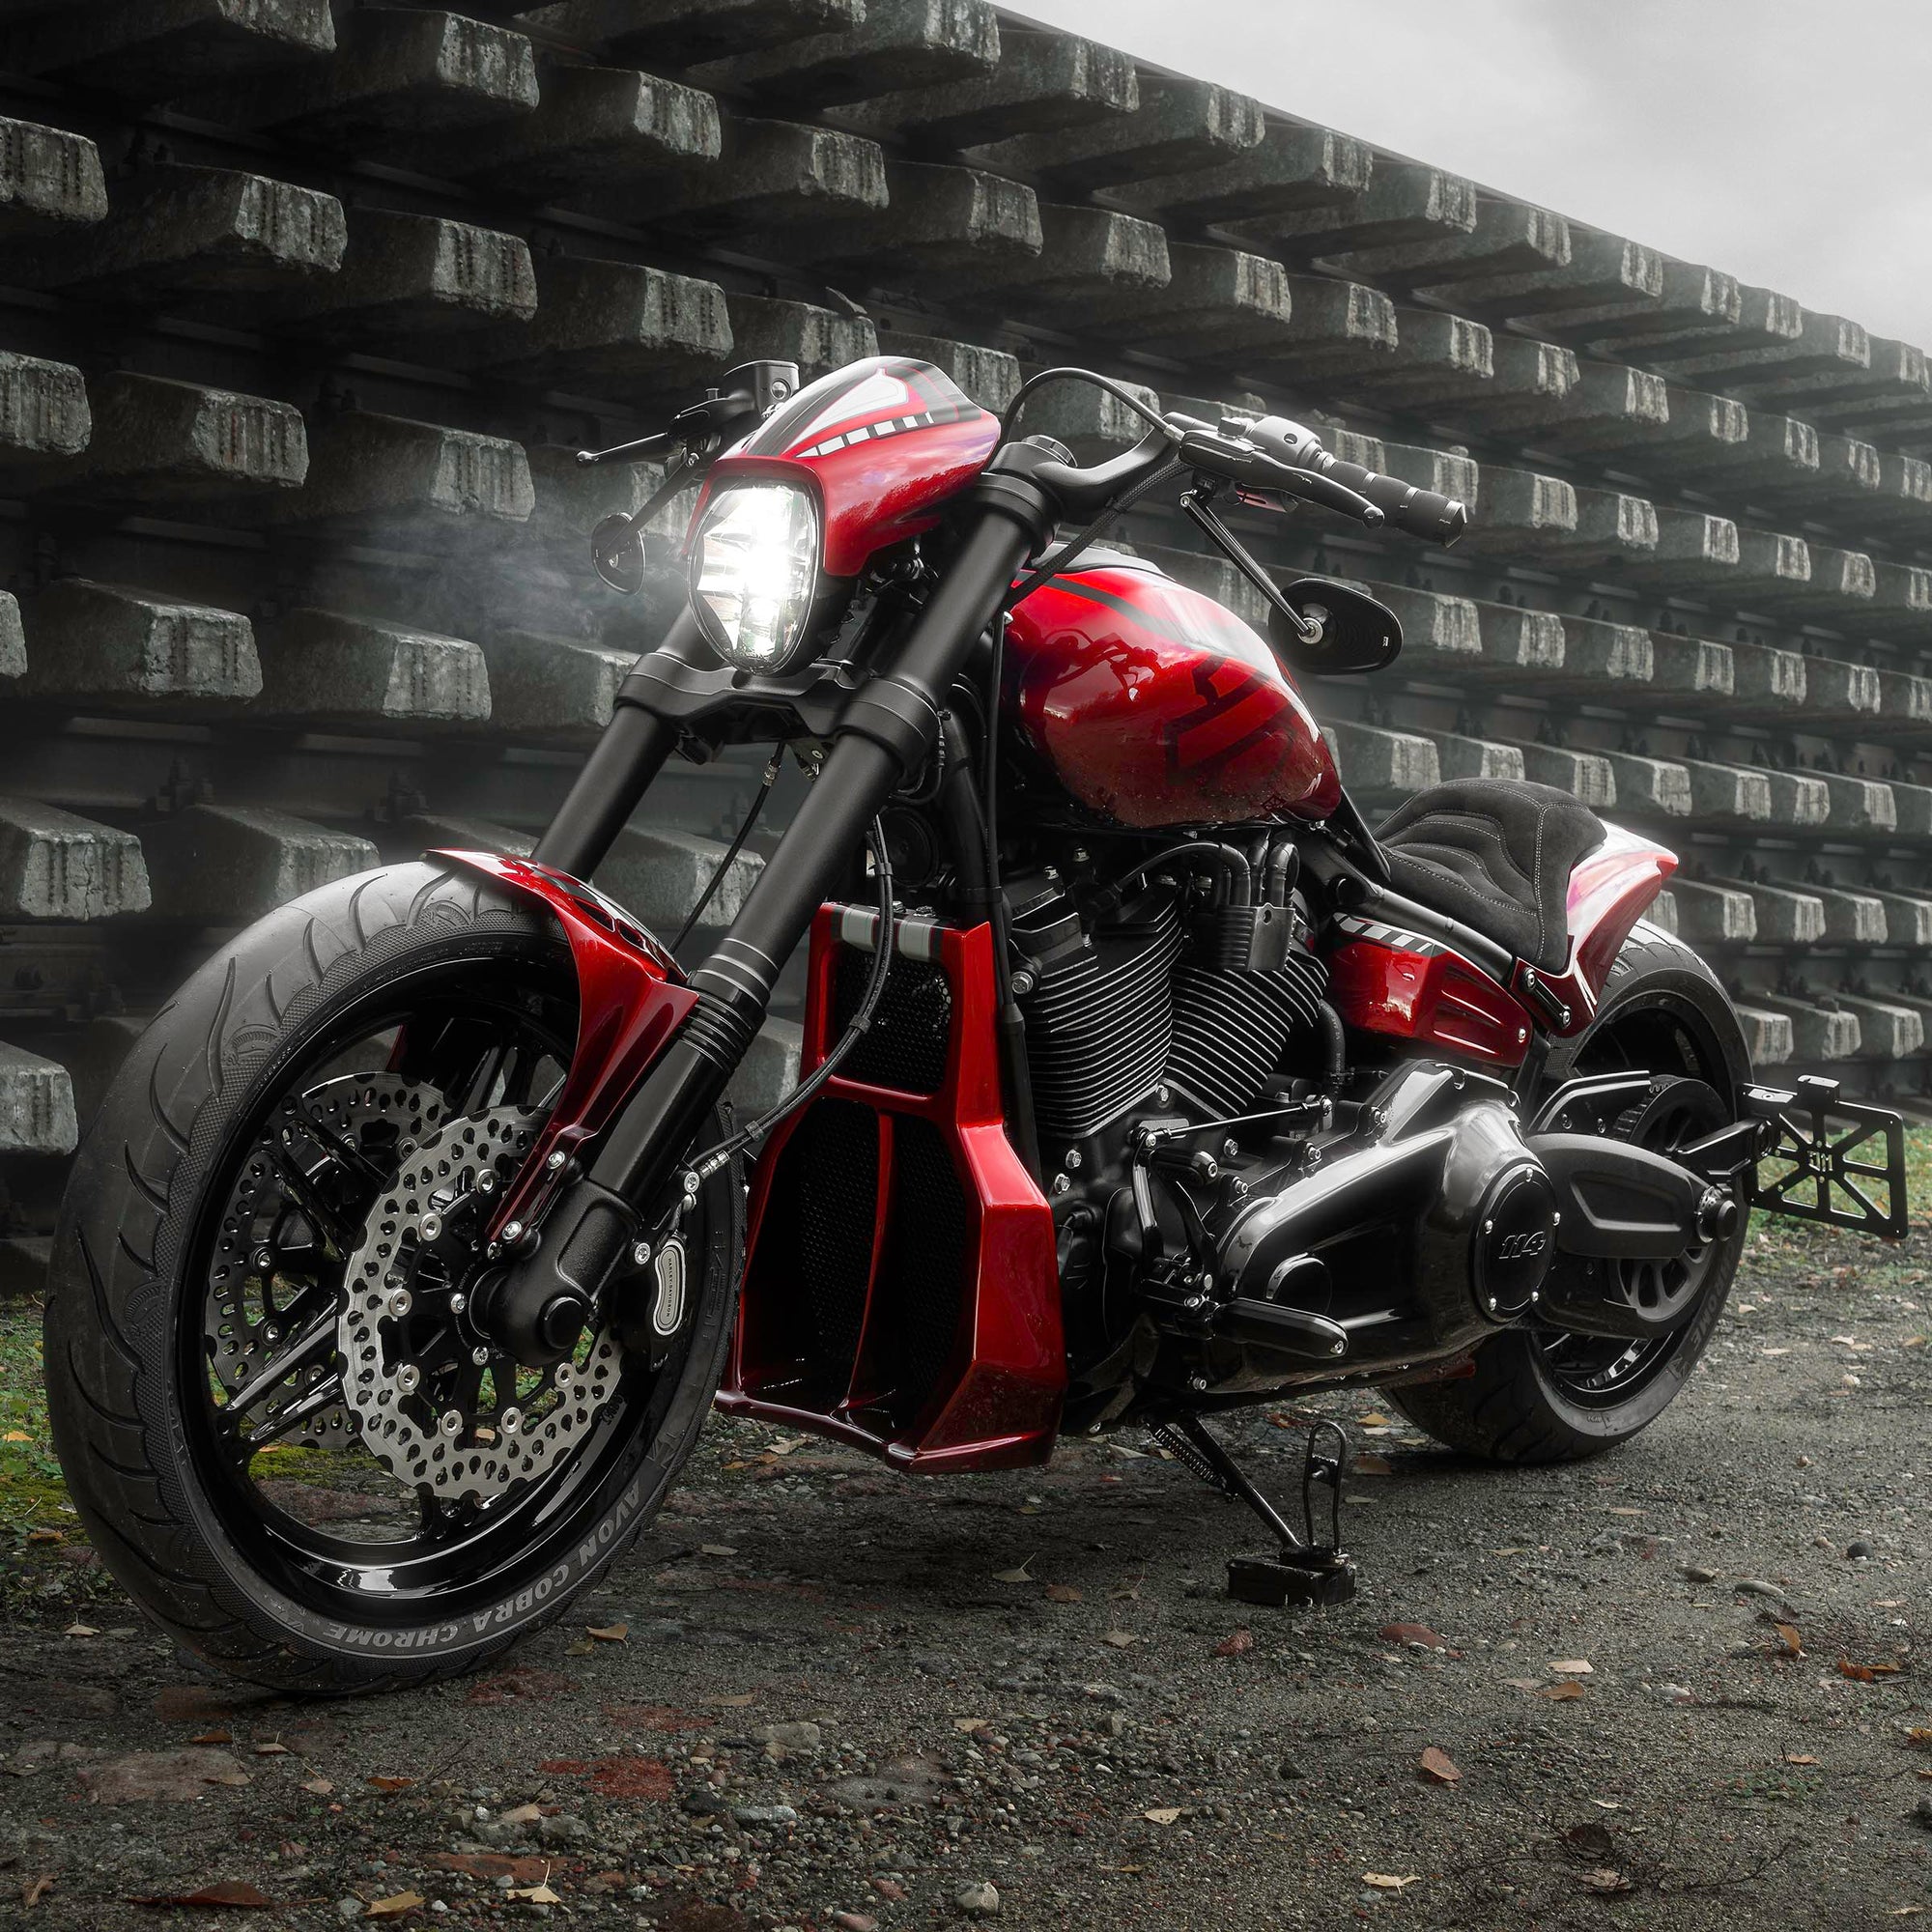 Harley Davidson motorcycle with Killer Custom parts from the side outside on a gloomy day in an industrial environment